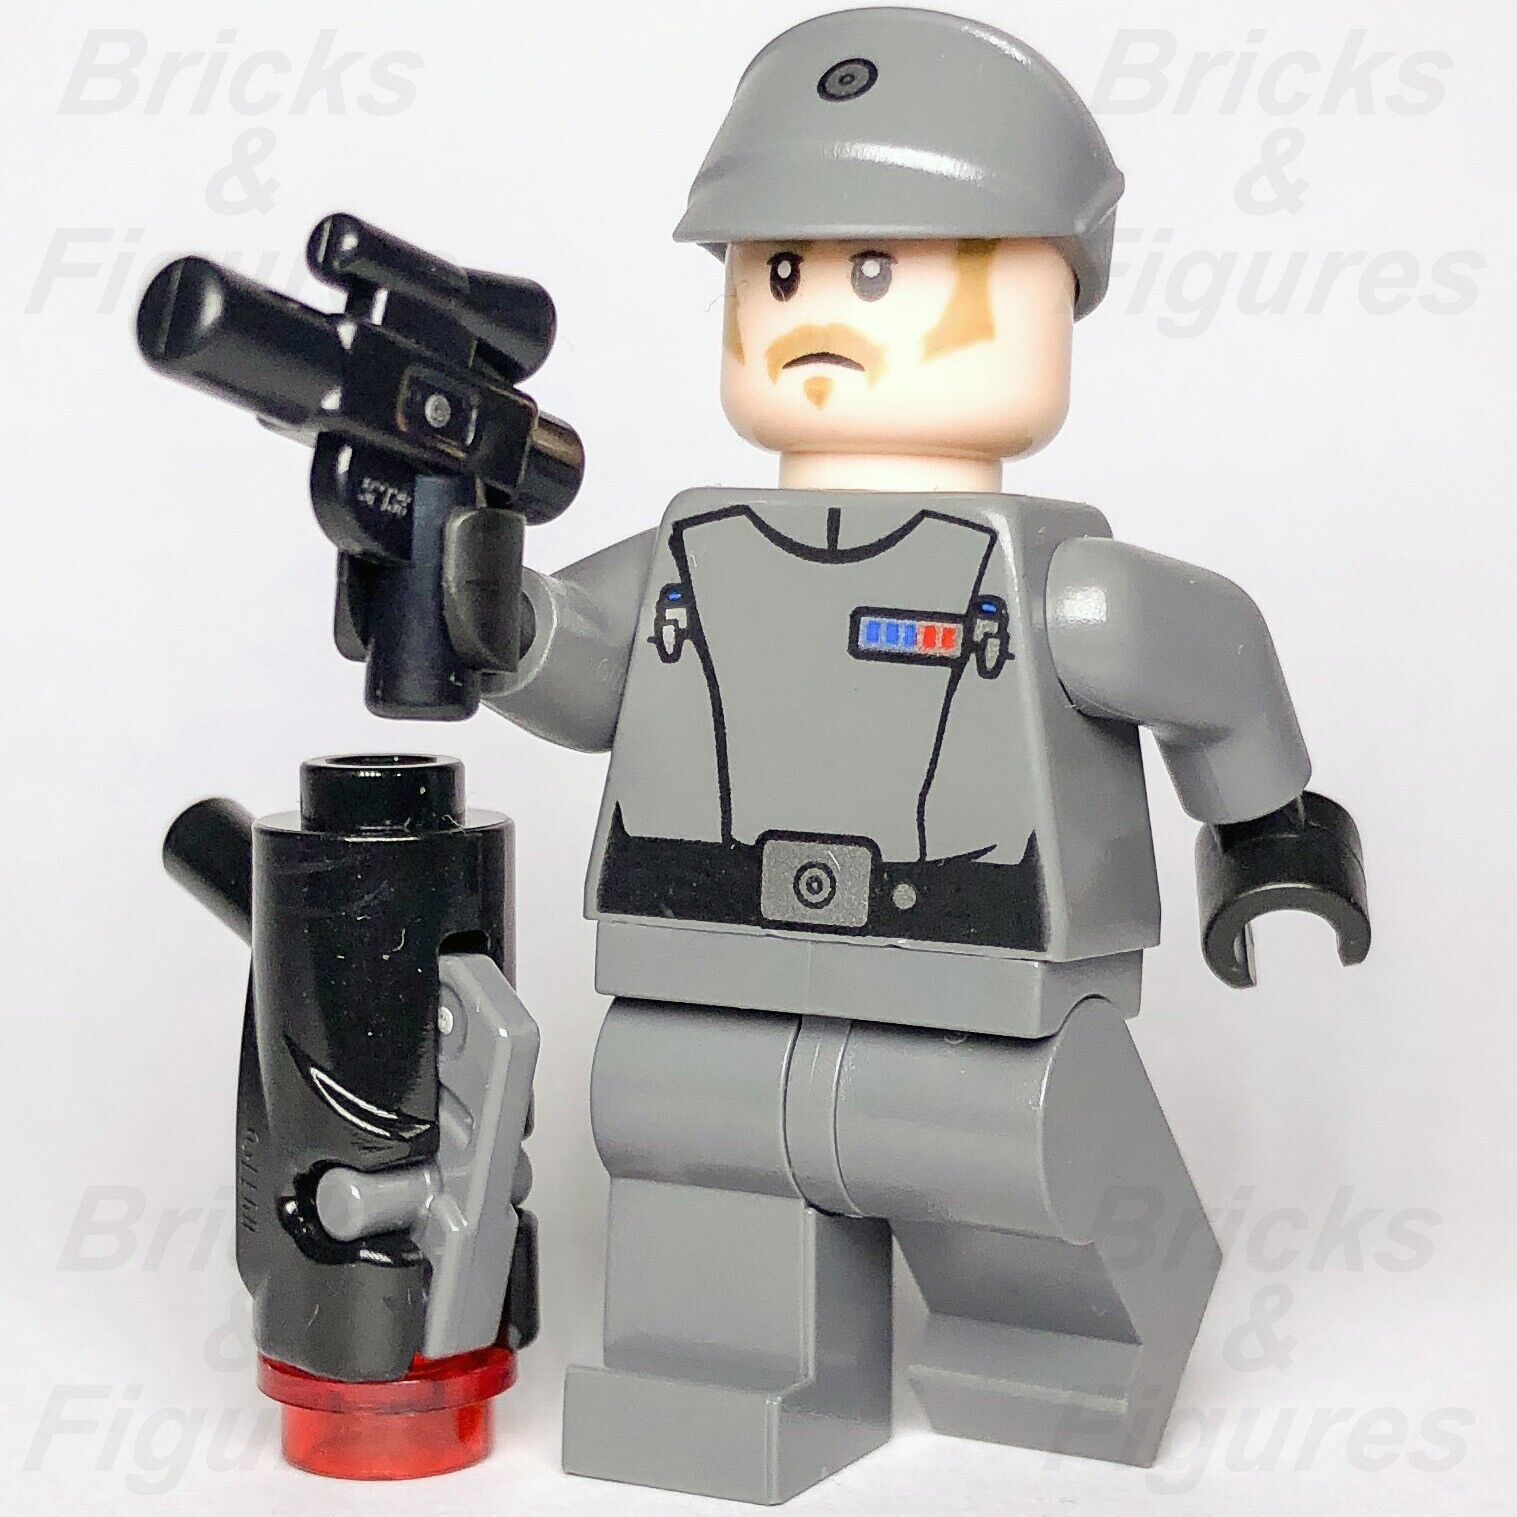 LEGO Star Wars Imperial Recruitment Officer Minifigure Solo Chief 7520